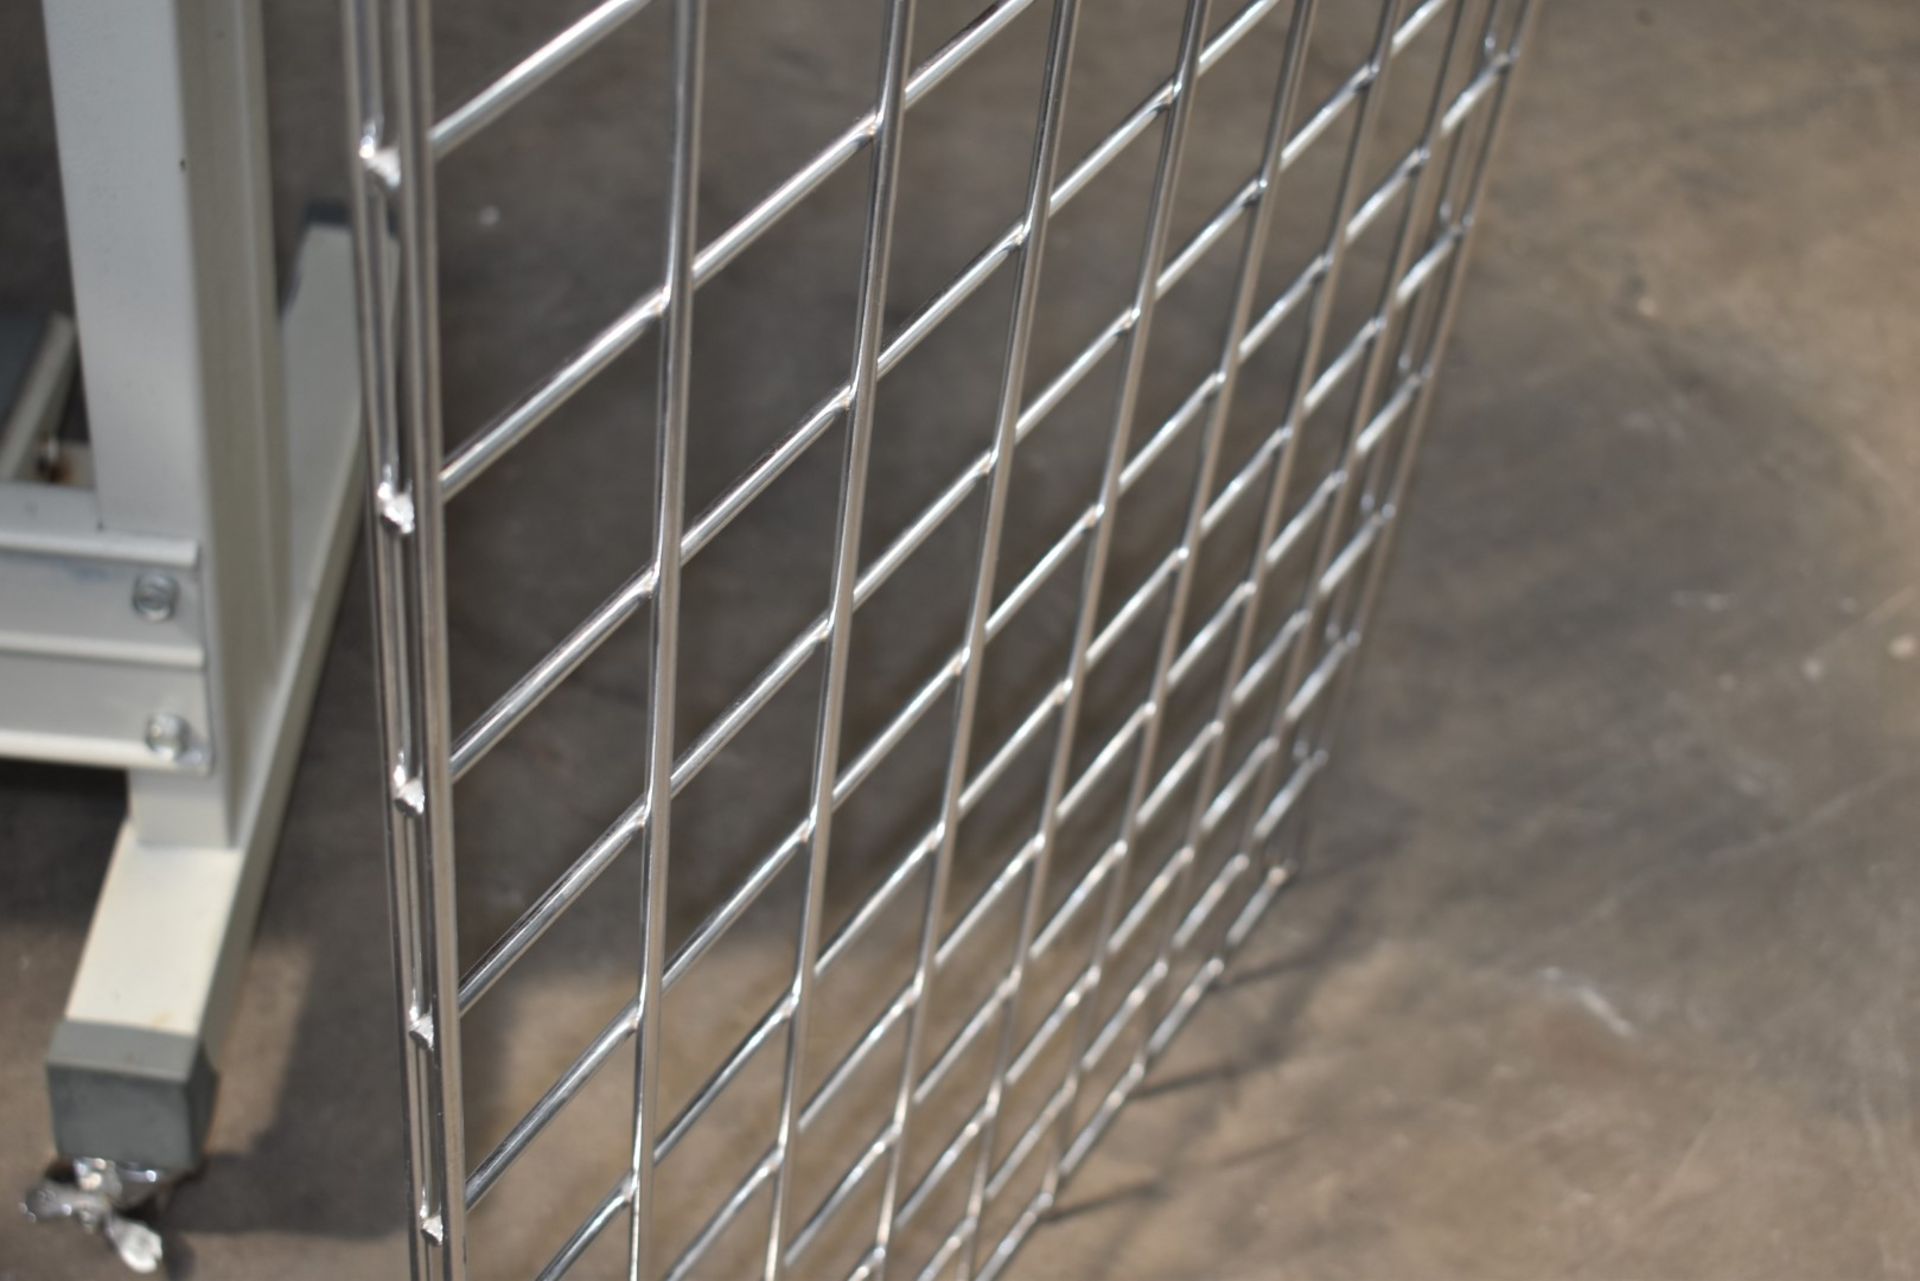 6 x Gridwall Mesh Wall Panels - Heavy Metal Construction With Chrome - Ideal For Creating Pet Cages! - Image 8 of 8